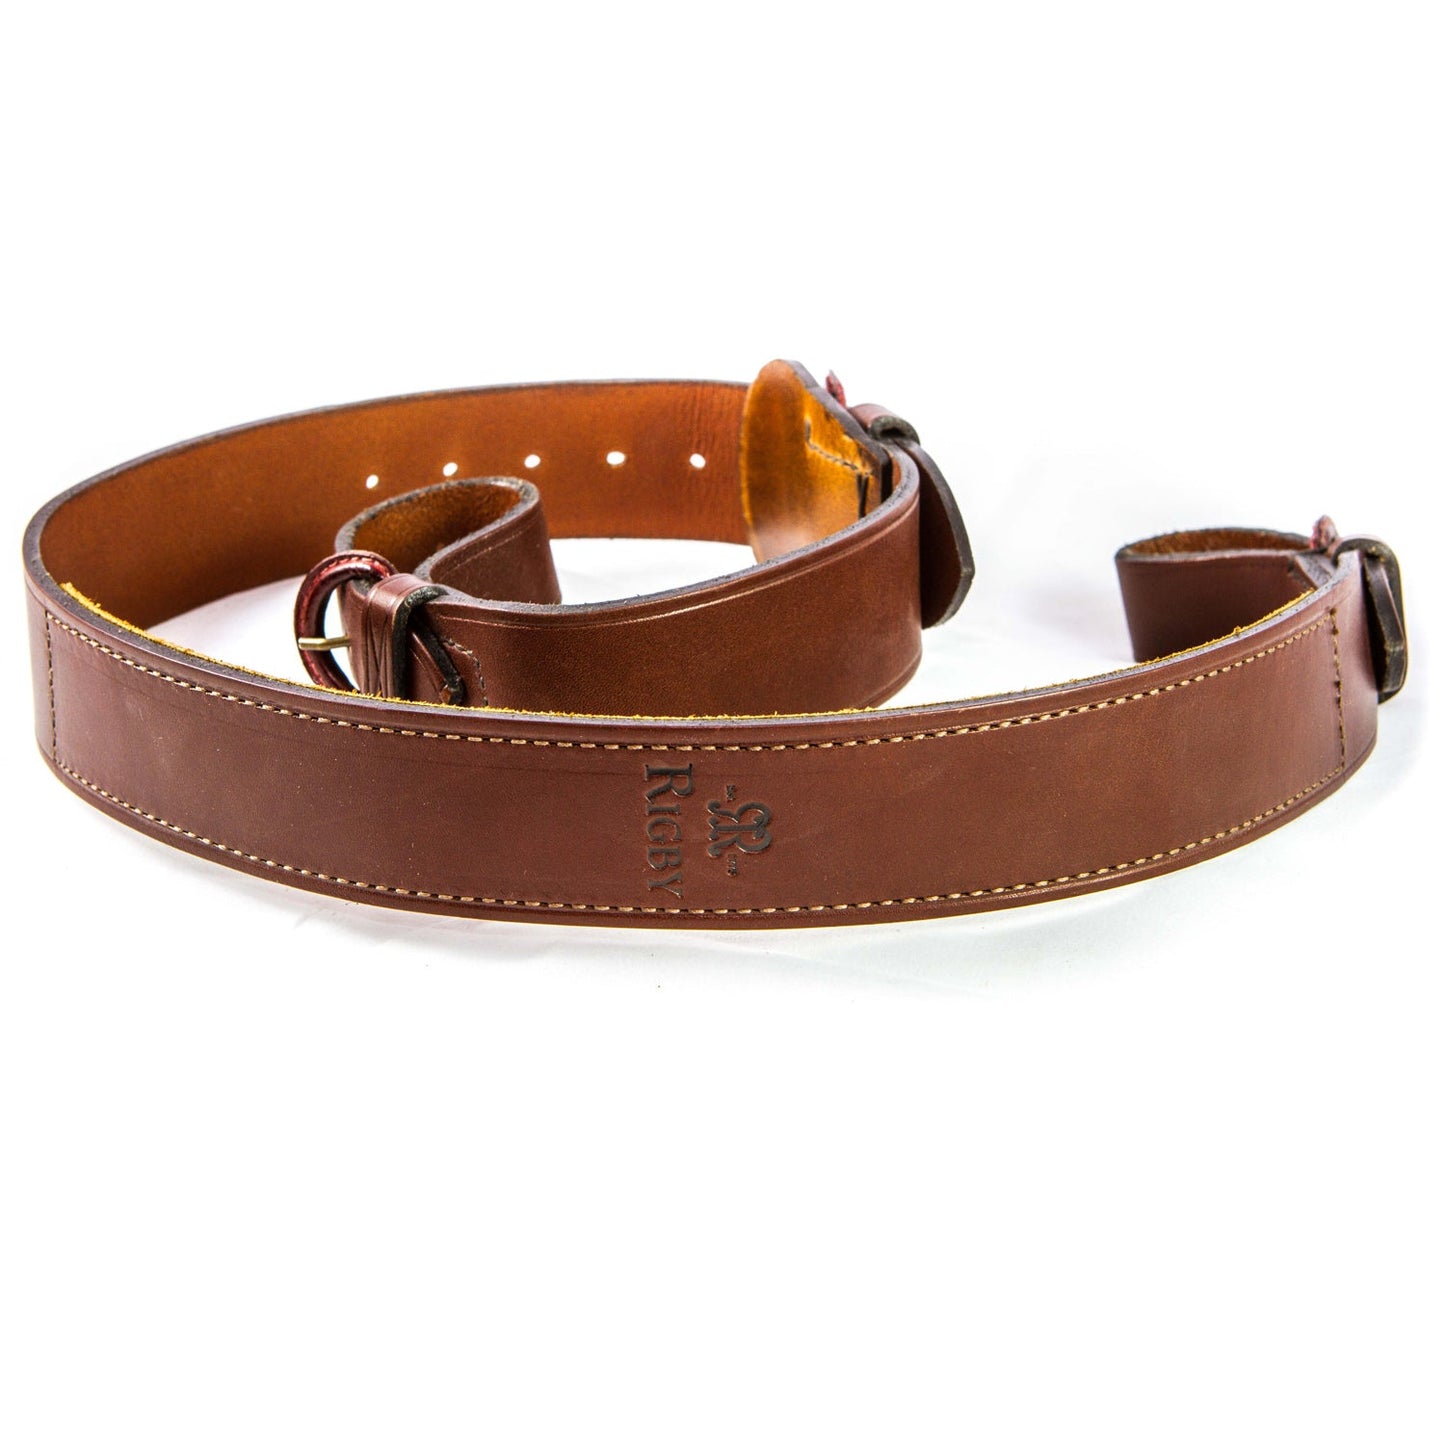 Rigby Rifle Sling Buckle/Thong